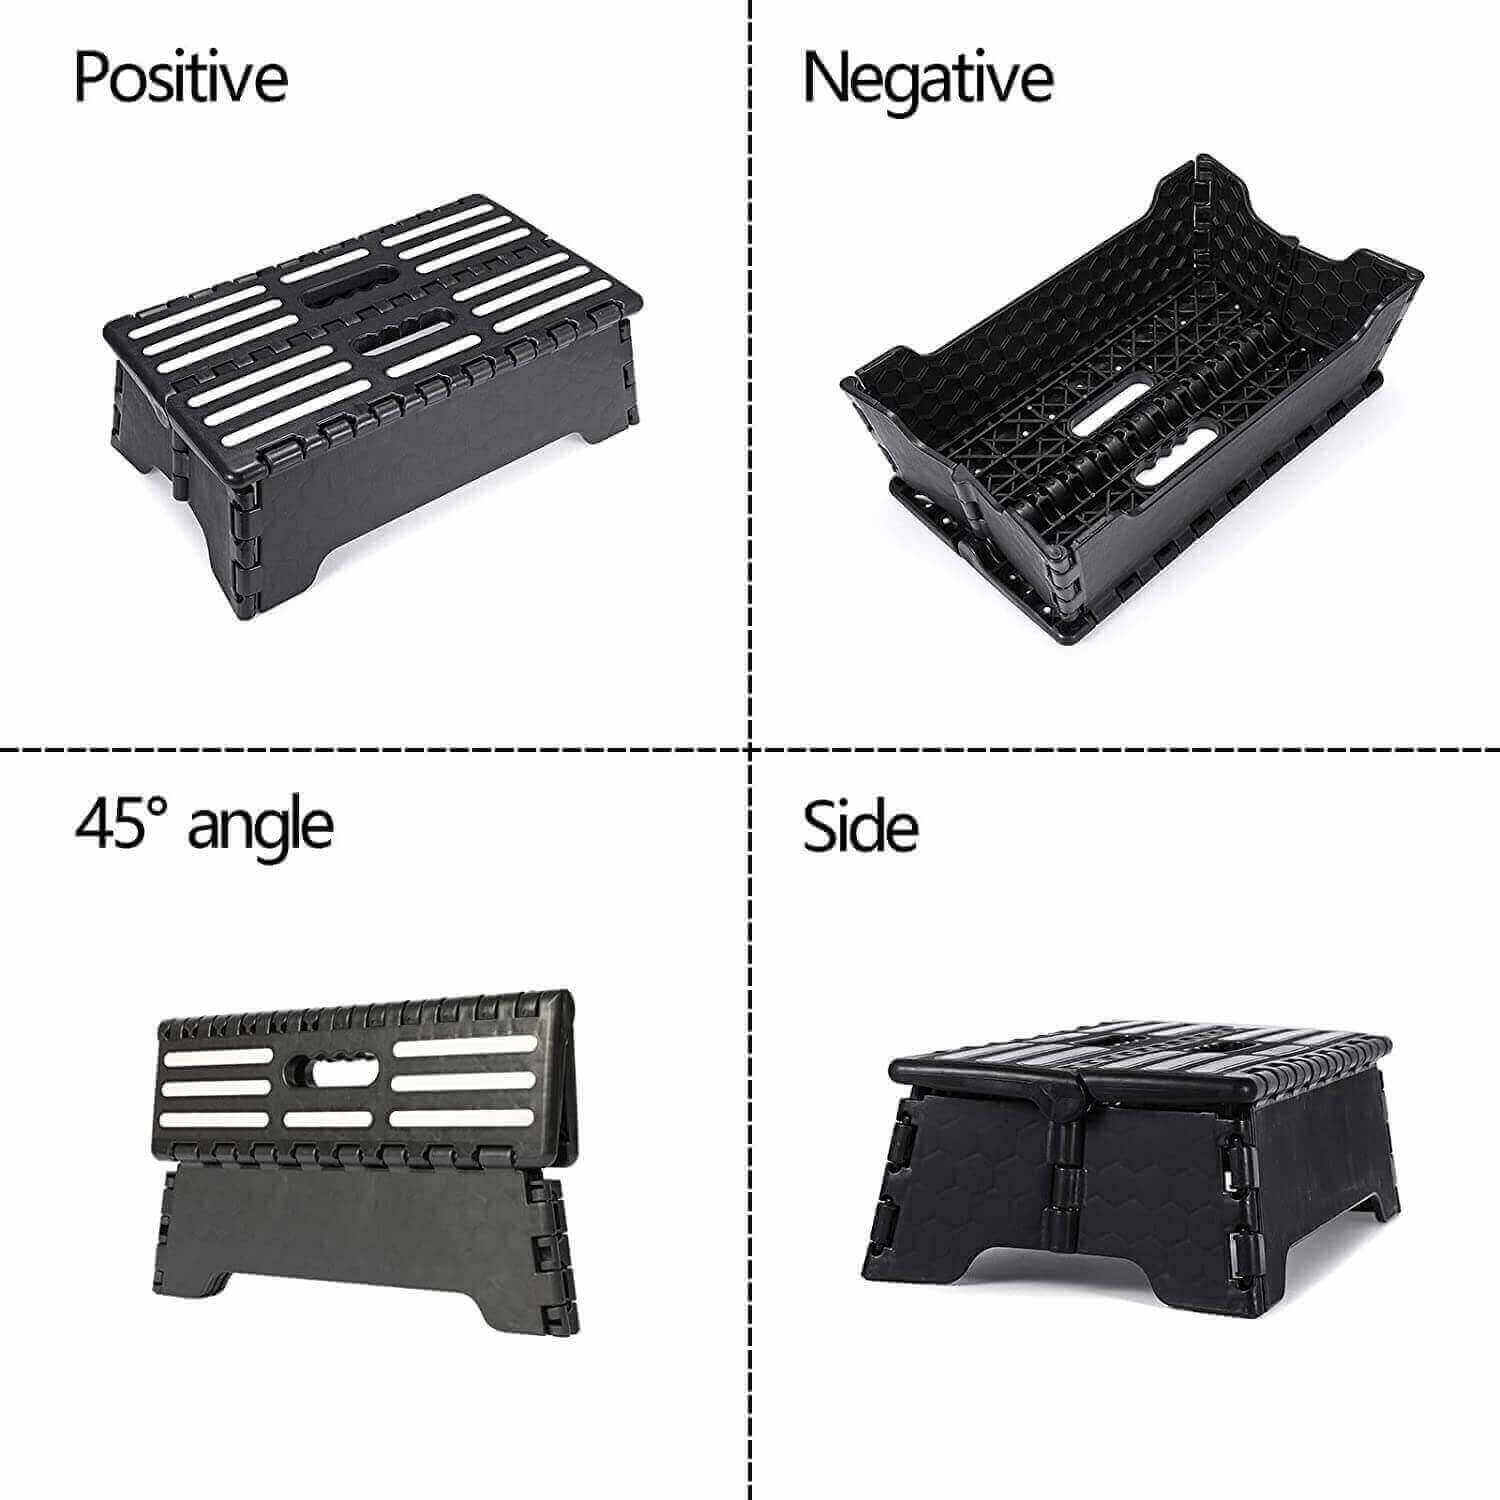 Lightweight plastic folding step stool in black, view of directions of the item